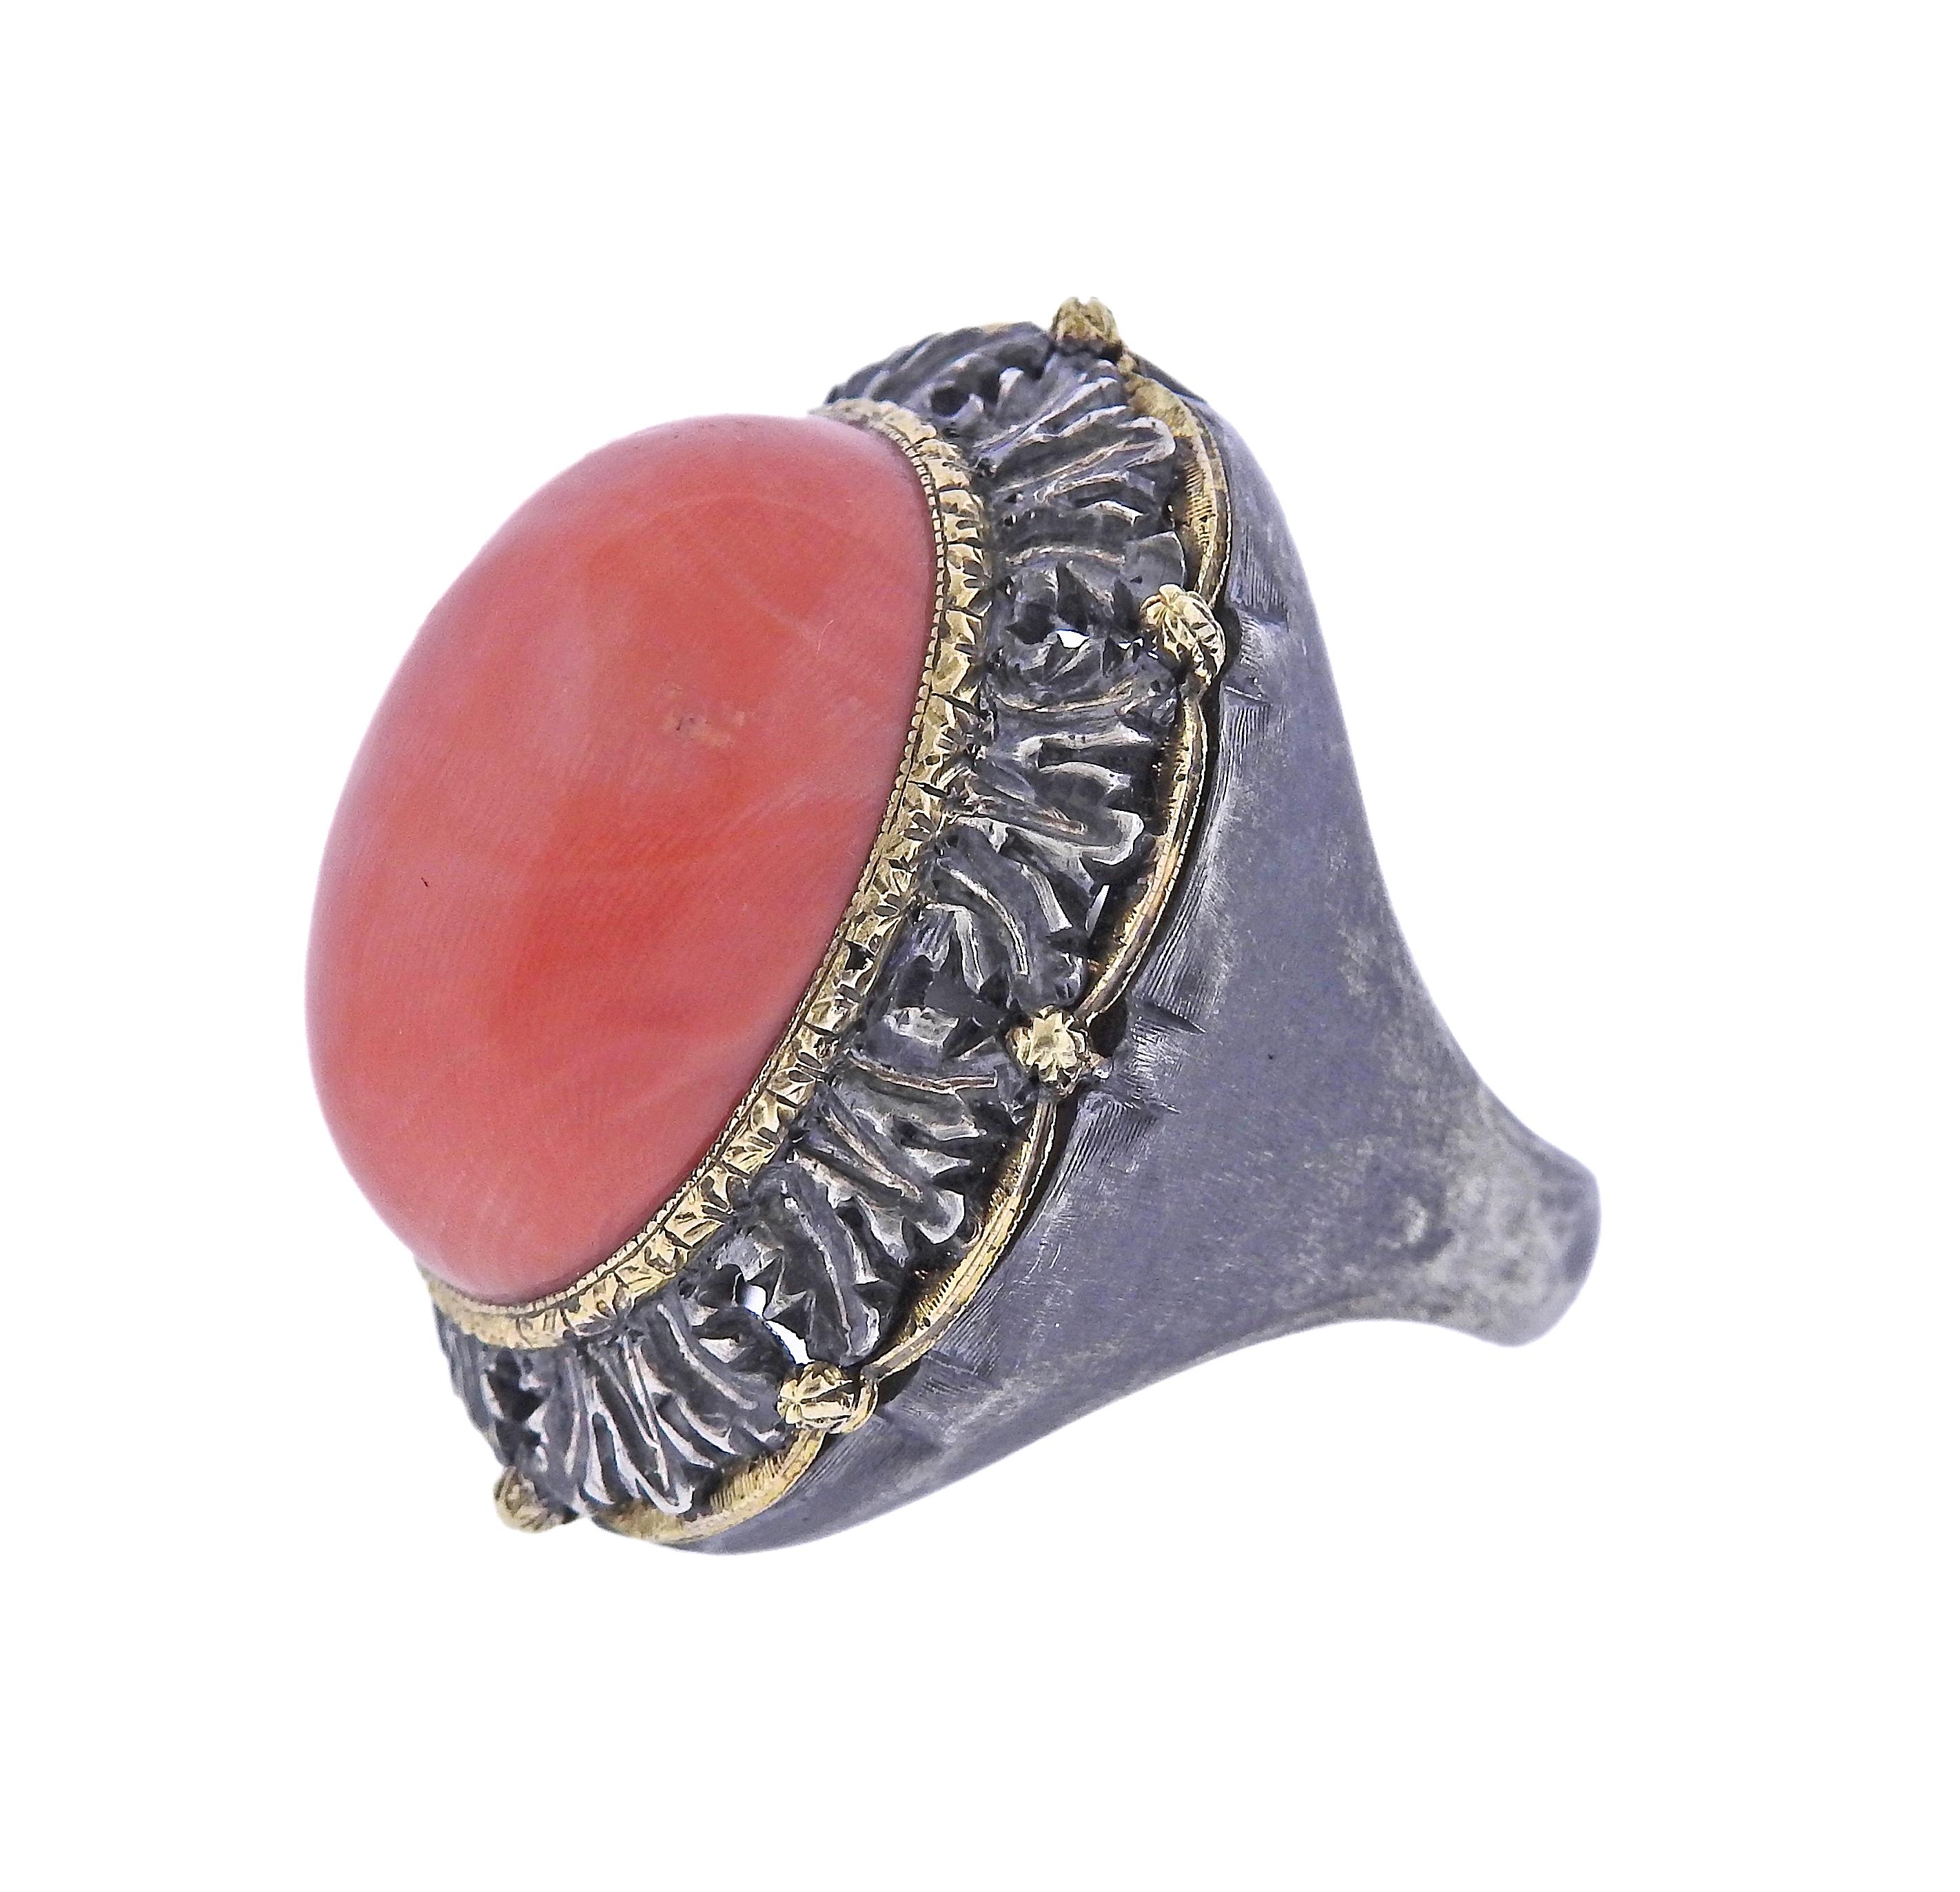 Large 18k gold and sterling silver ring by Buccellati, with 23.2 x 15.4mm coral. Ring size - 6.75, ring top is 33mm wide. Marked: Buccellati. Weight - 23.5 grams.